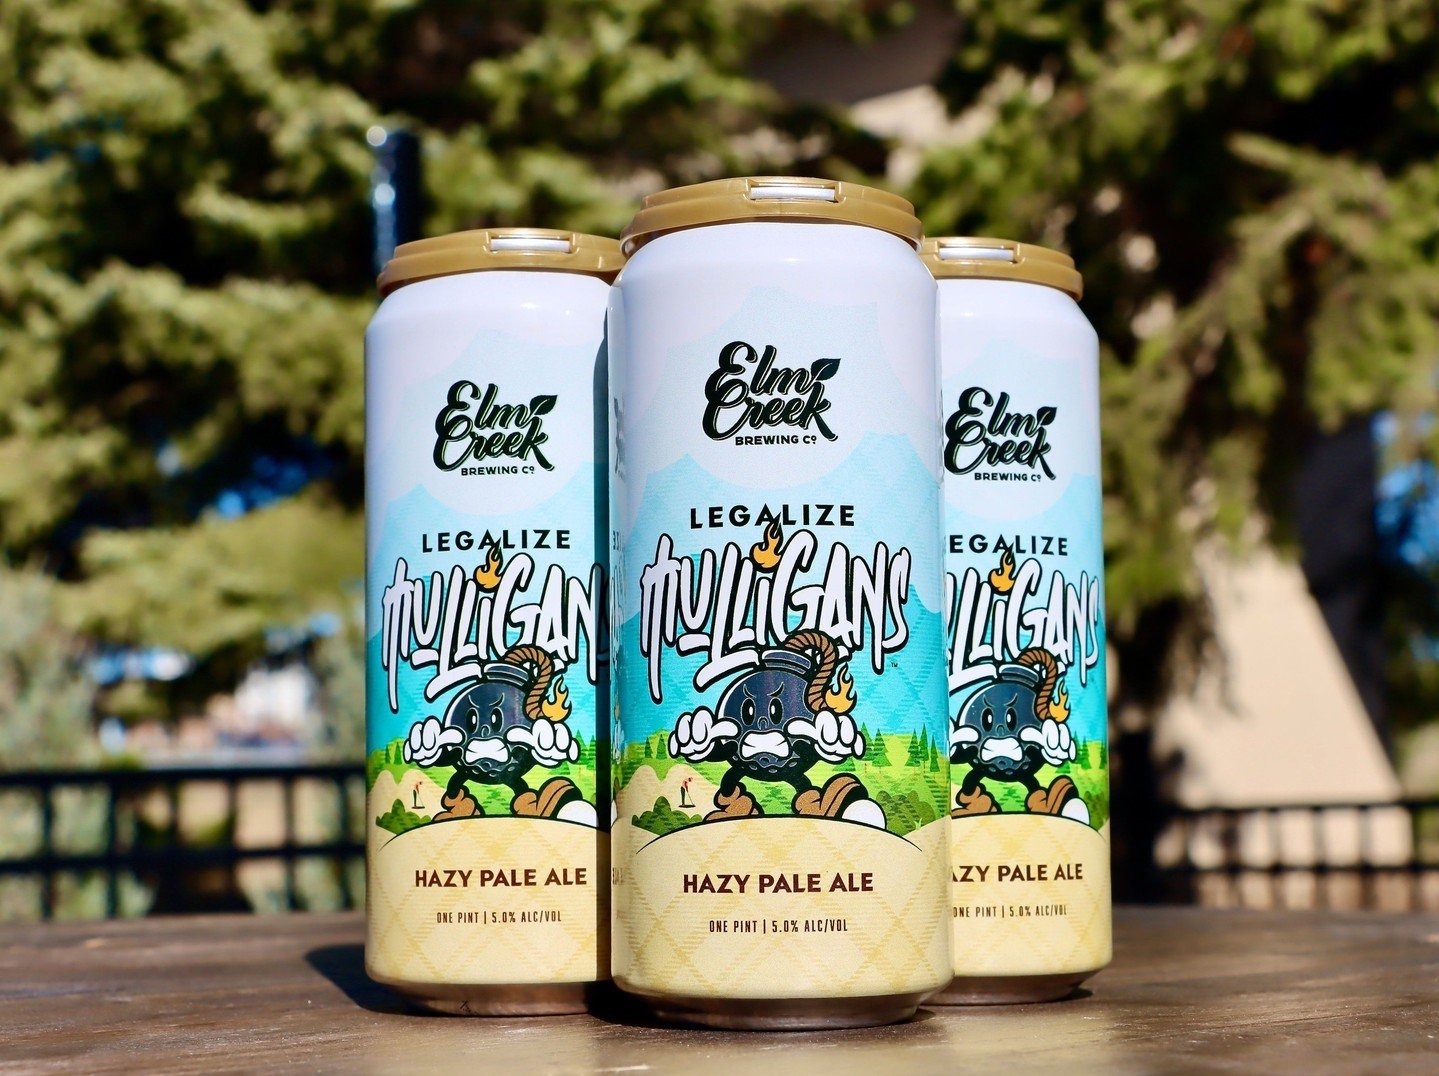 Each one of these in your golf cooler gets you a mulligan, we don't make the rules that's just how it is 🤪⁠
⁠
⛳️ Try it yourself, we've got 4-packs to go at the taproom and stocked up at your local liquor store! ⁠
⁠
⁠
⁠
⁠
⁠
#elmcreekbrewing #mncraft